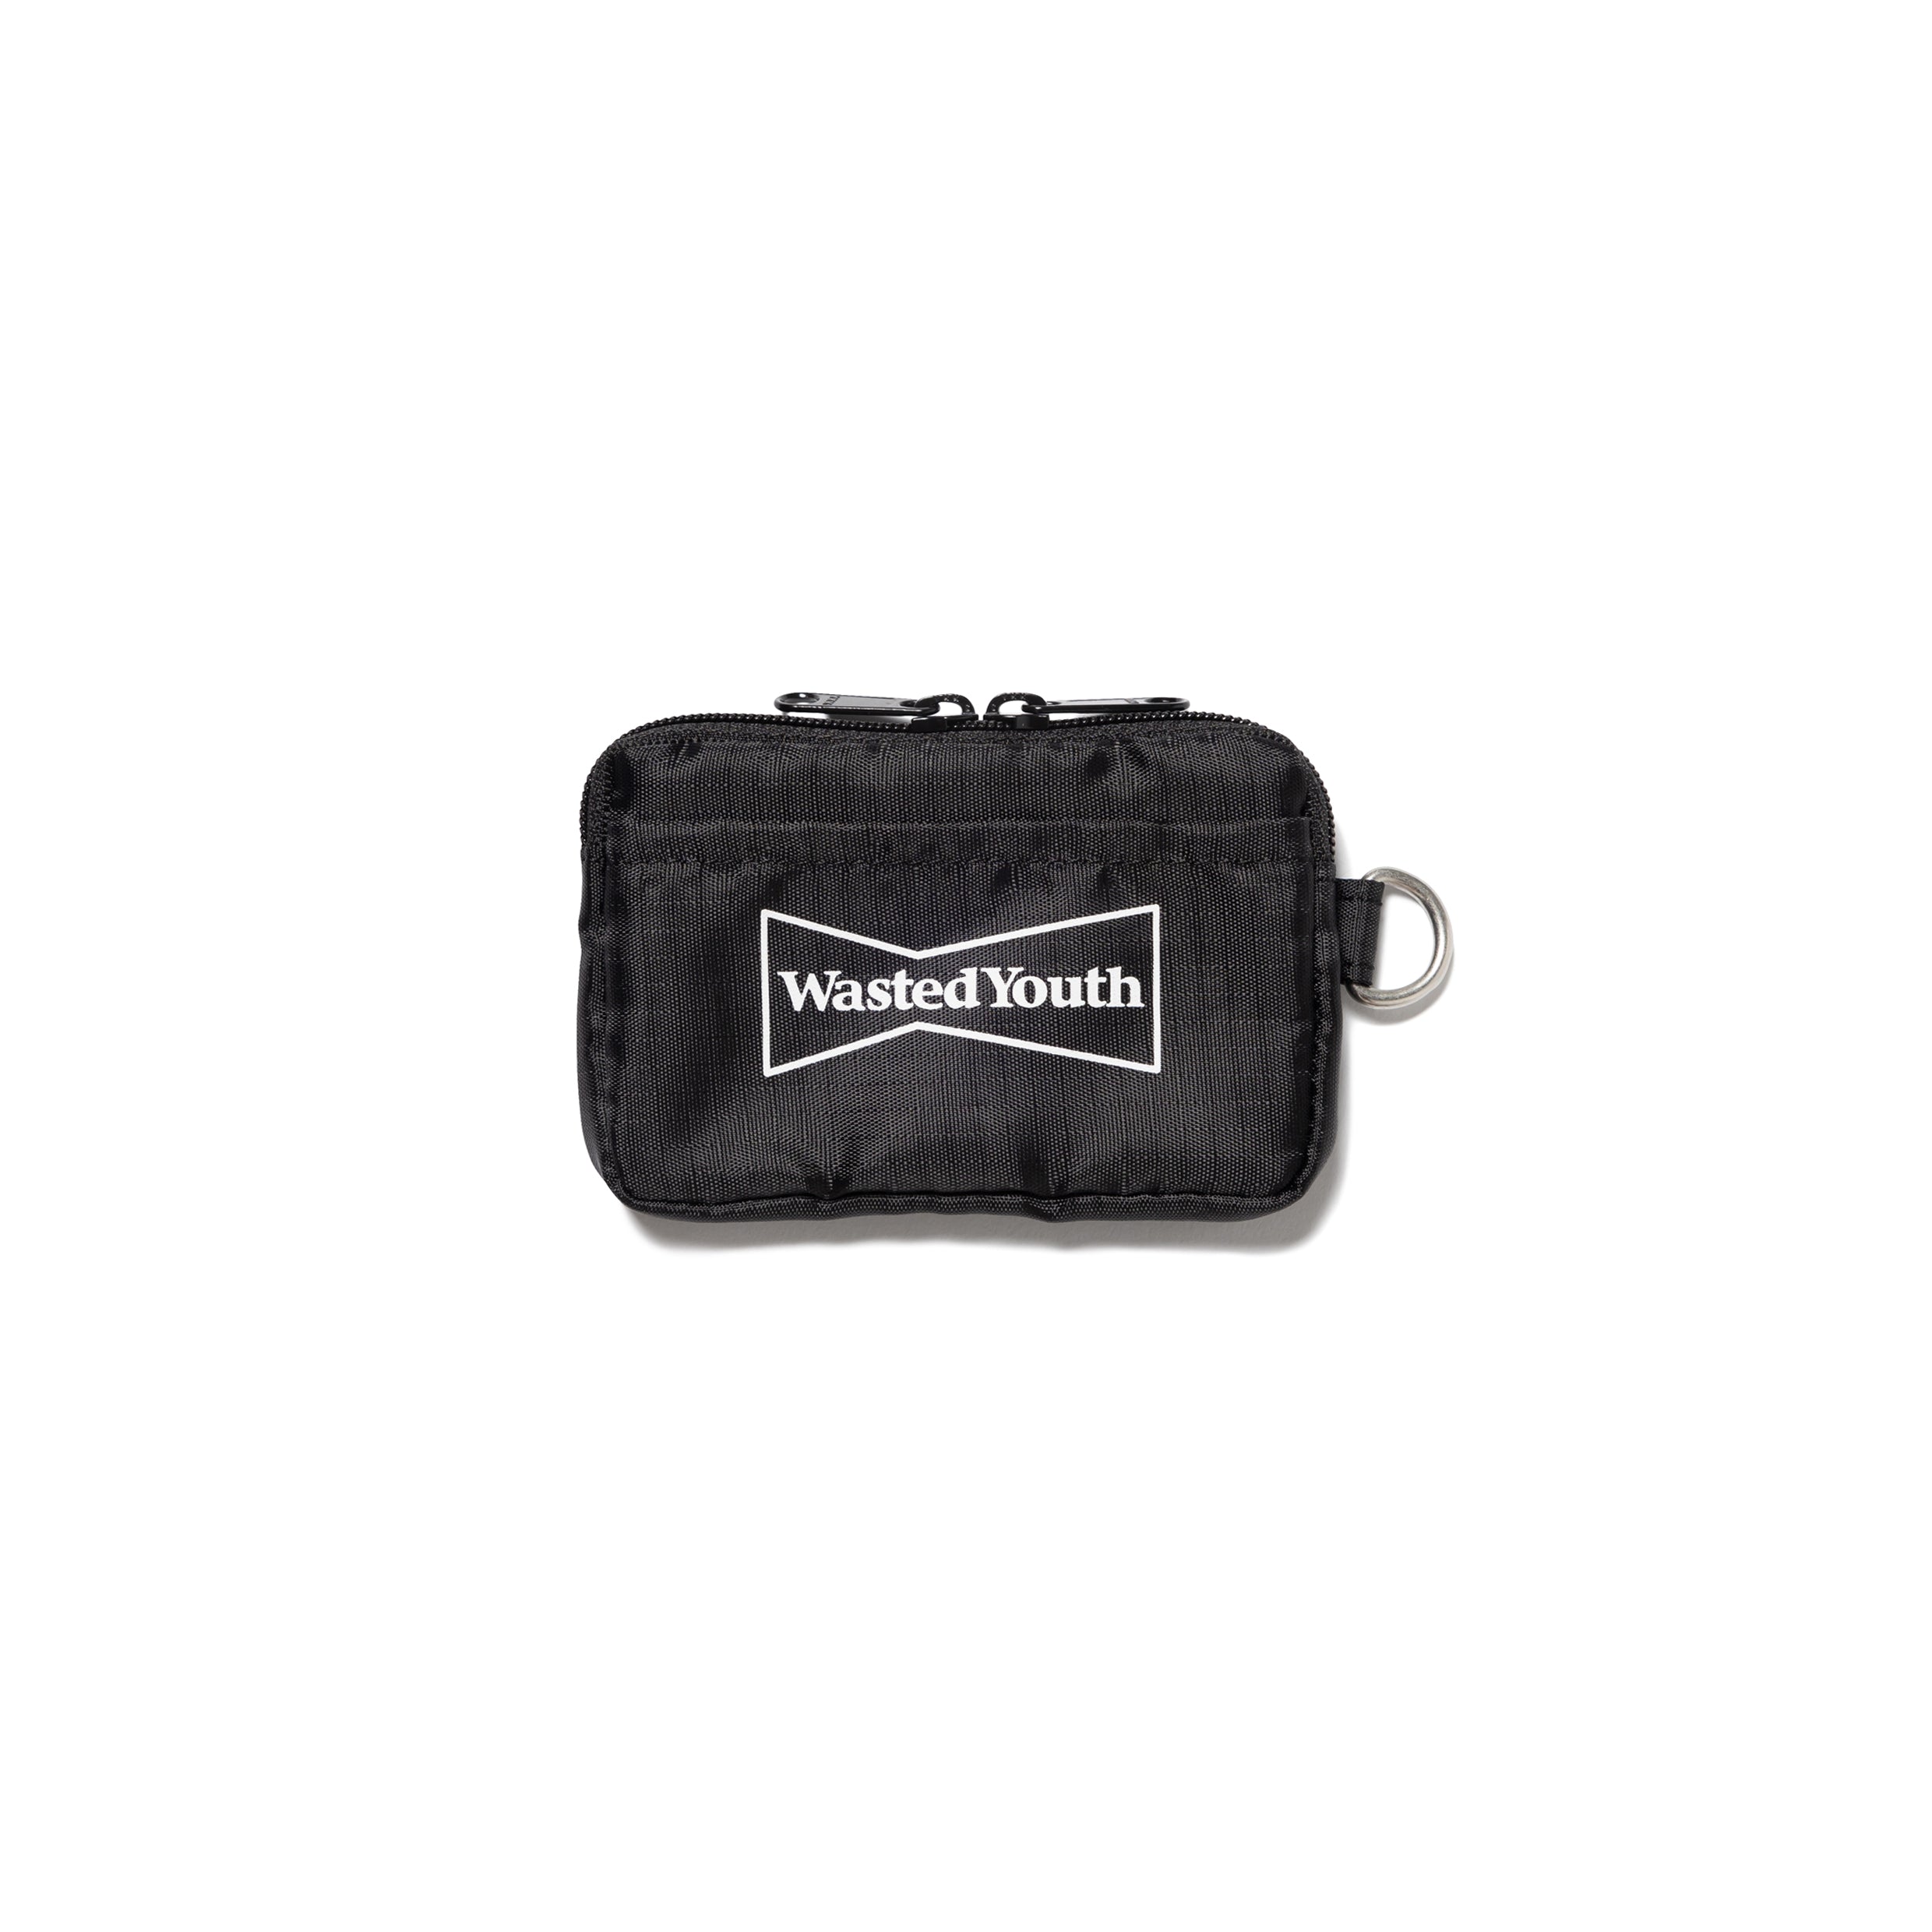 Wasted Youth Travel Case Mini verdy 黒　新品